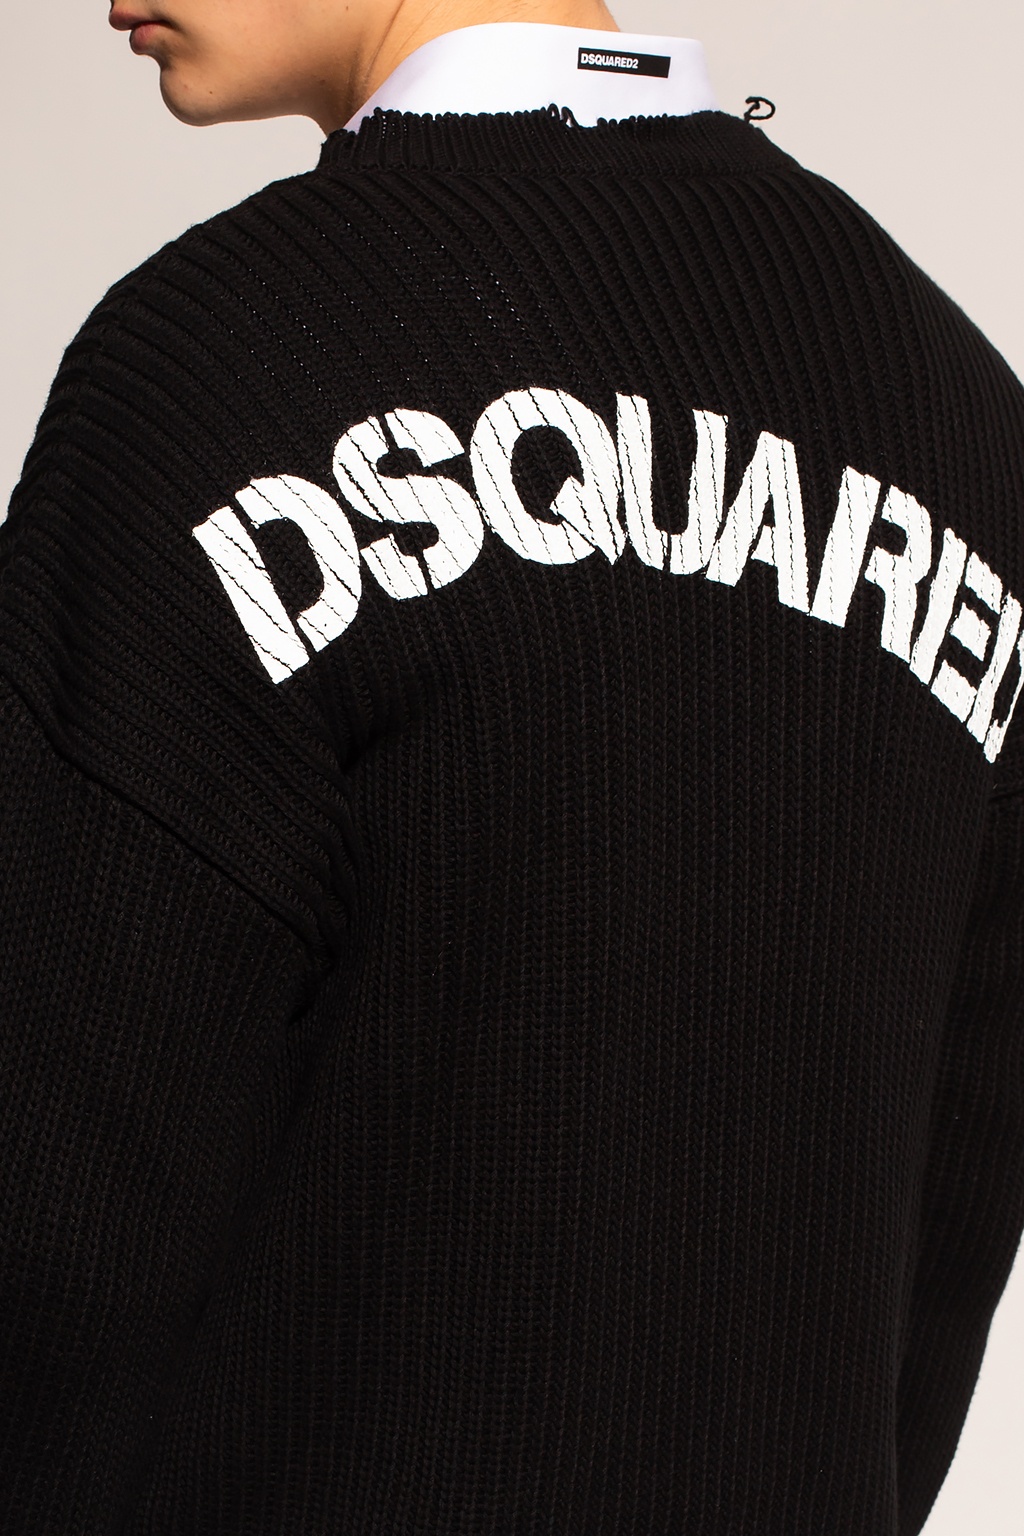 Dsquared2 Sweater with logo | Men's Clothing | IetpShops